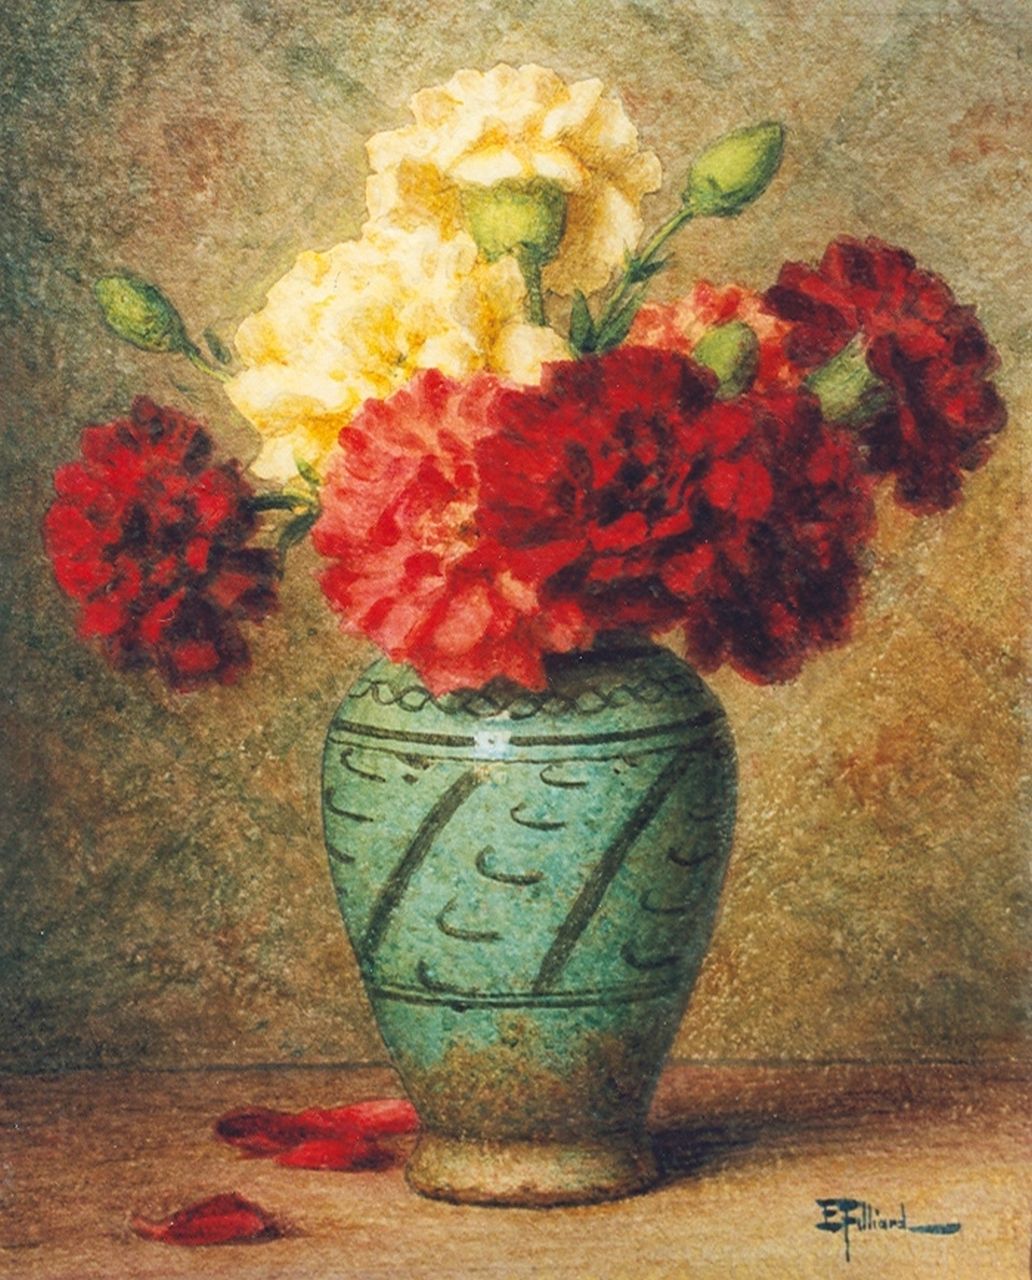 Filliard E.  | Ernest Filliard, Still life with carnations in a vase, watercolour on paper 35.7 x 28.7 cm, signed l.r.